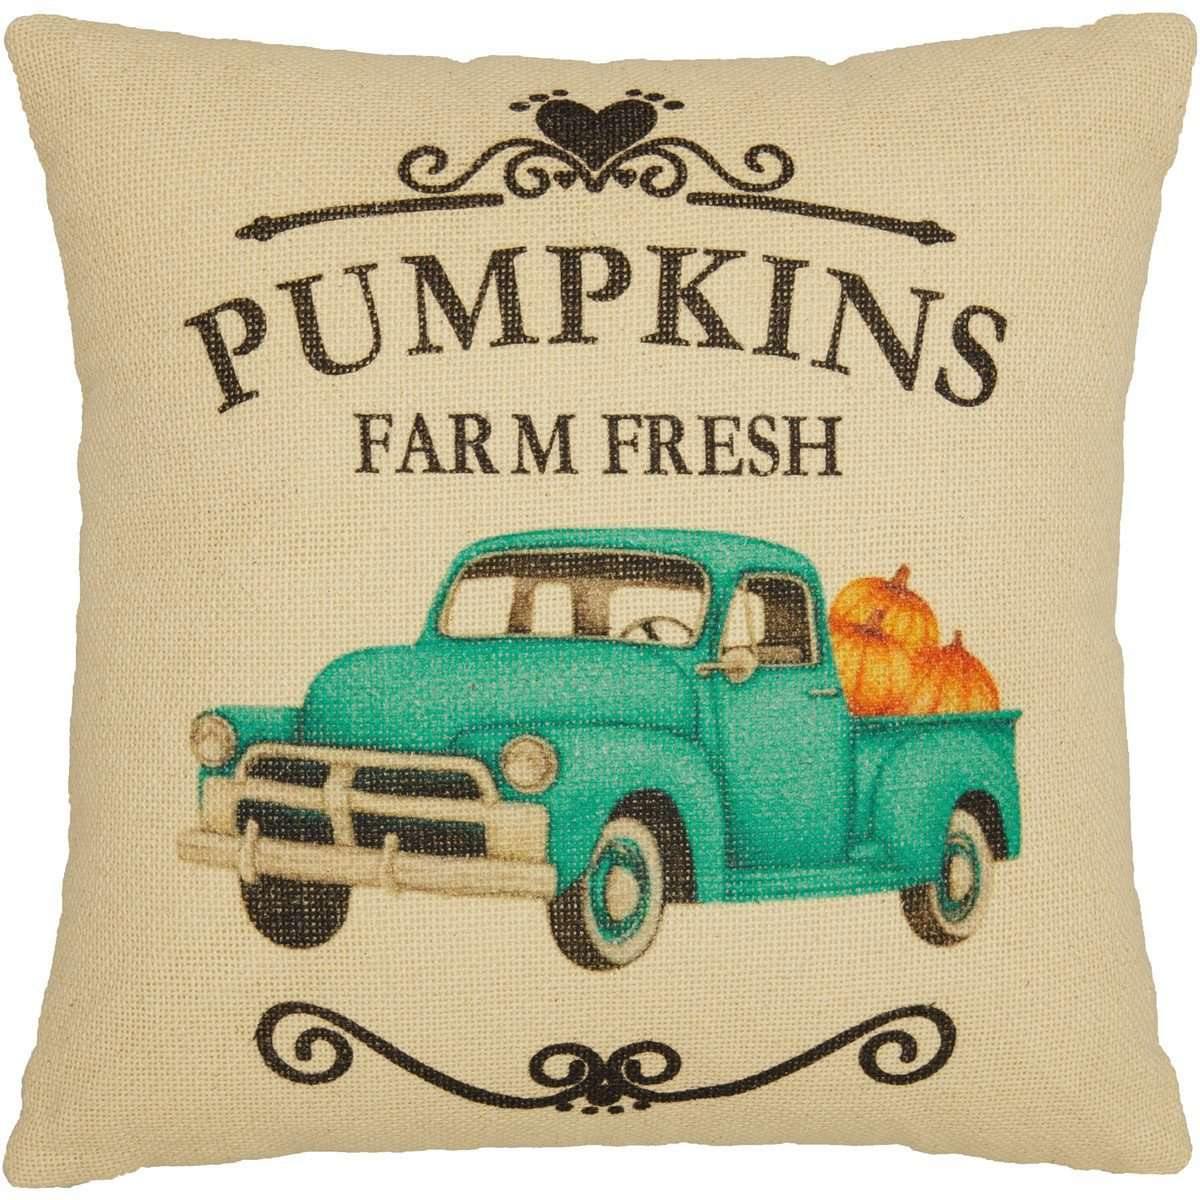 Fall on the Farm Truck Pillow 18x18 VHC Brands front